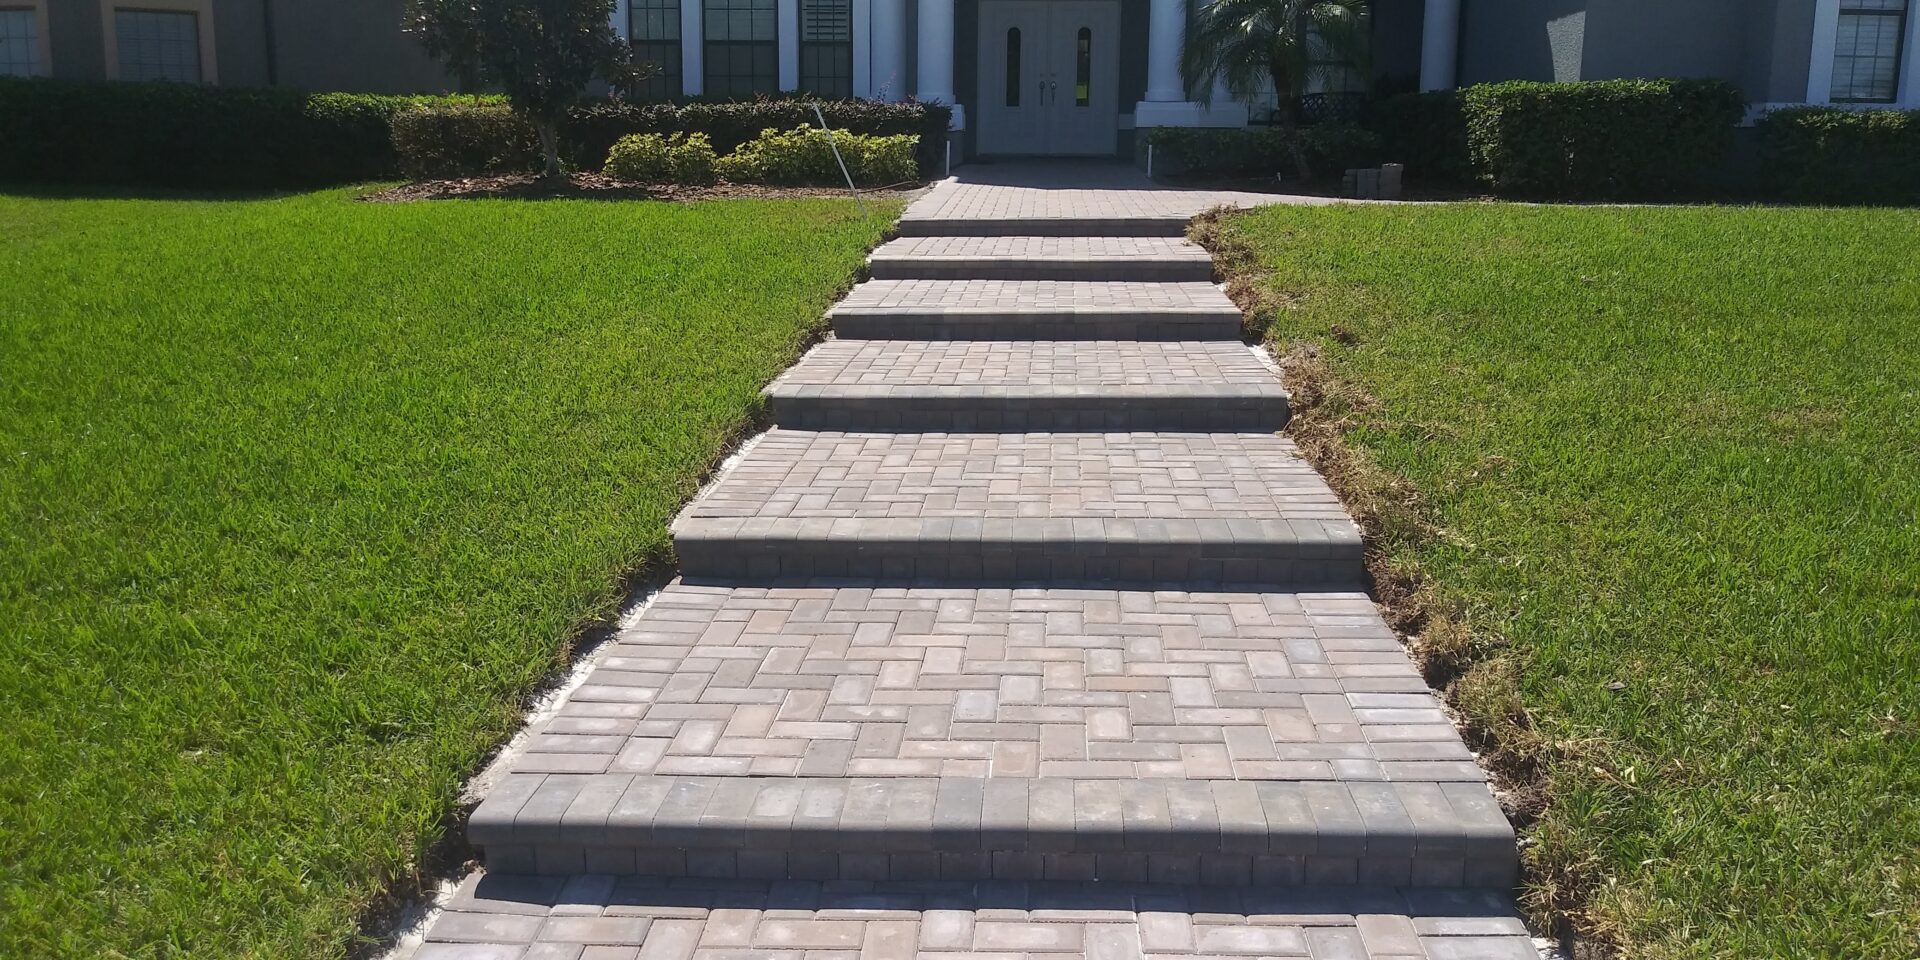 brick paver walkway in front of house